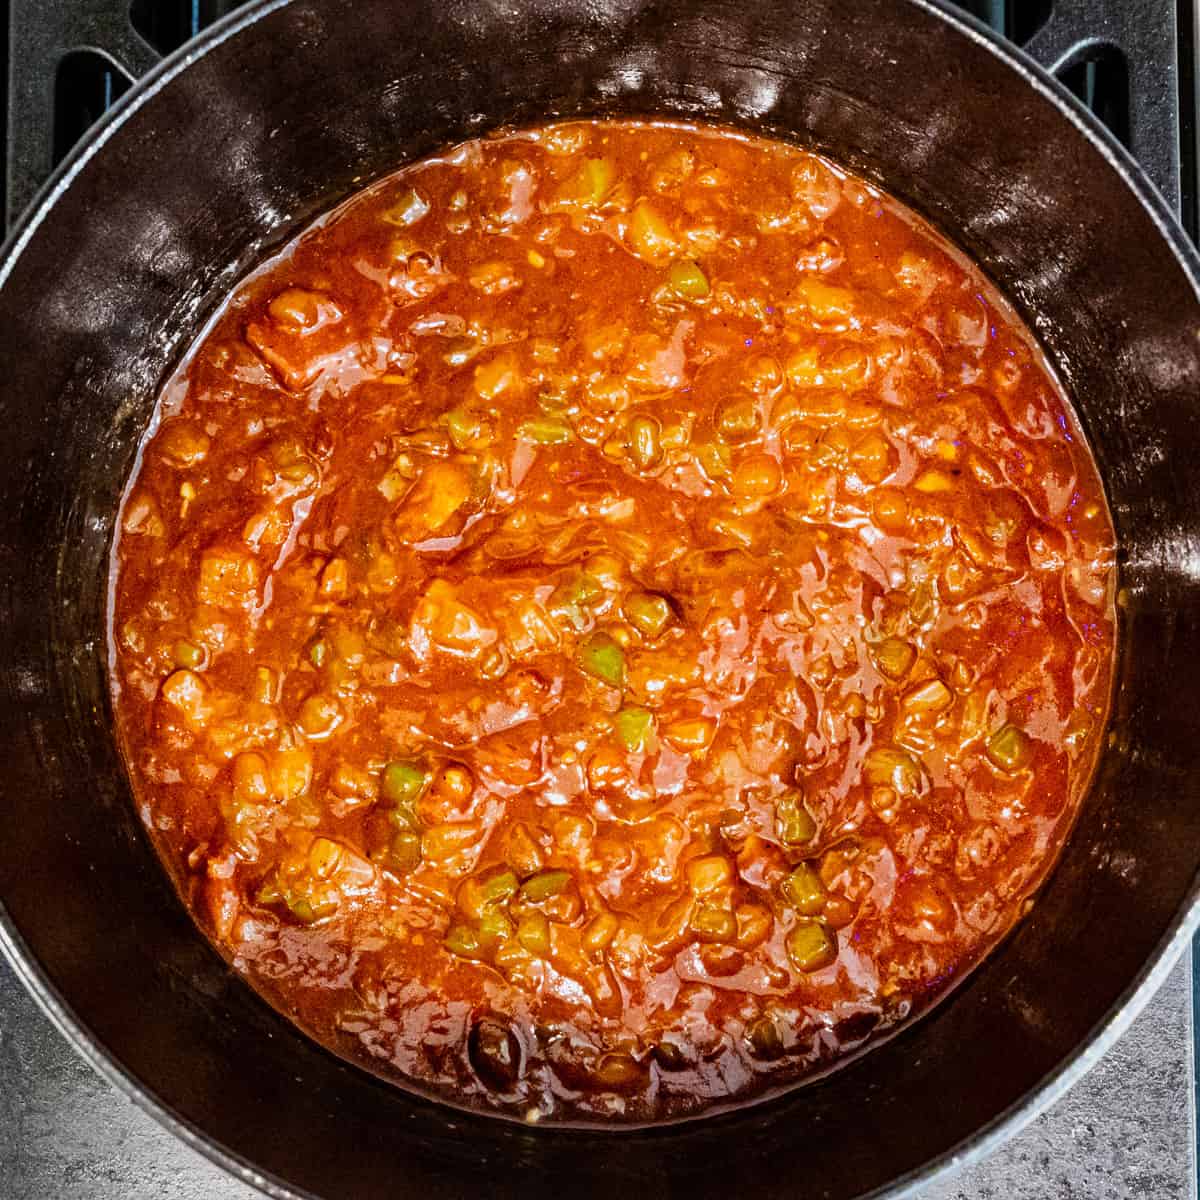 Sauce for baked beans shown in a cast iron pot.